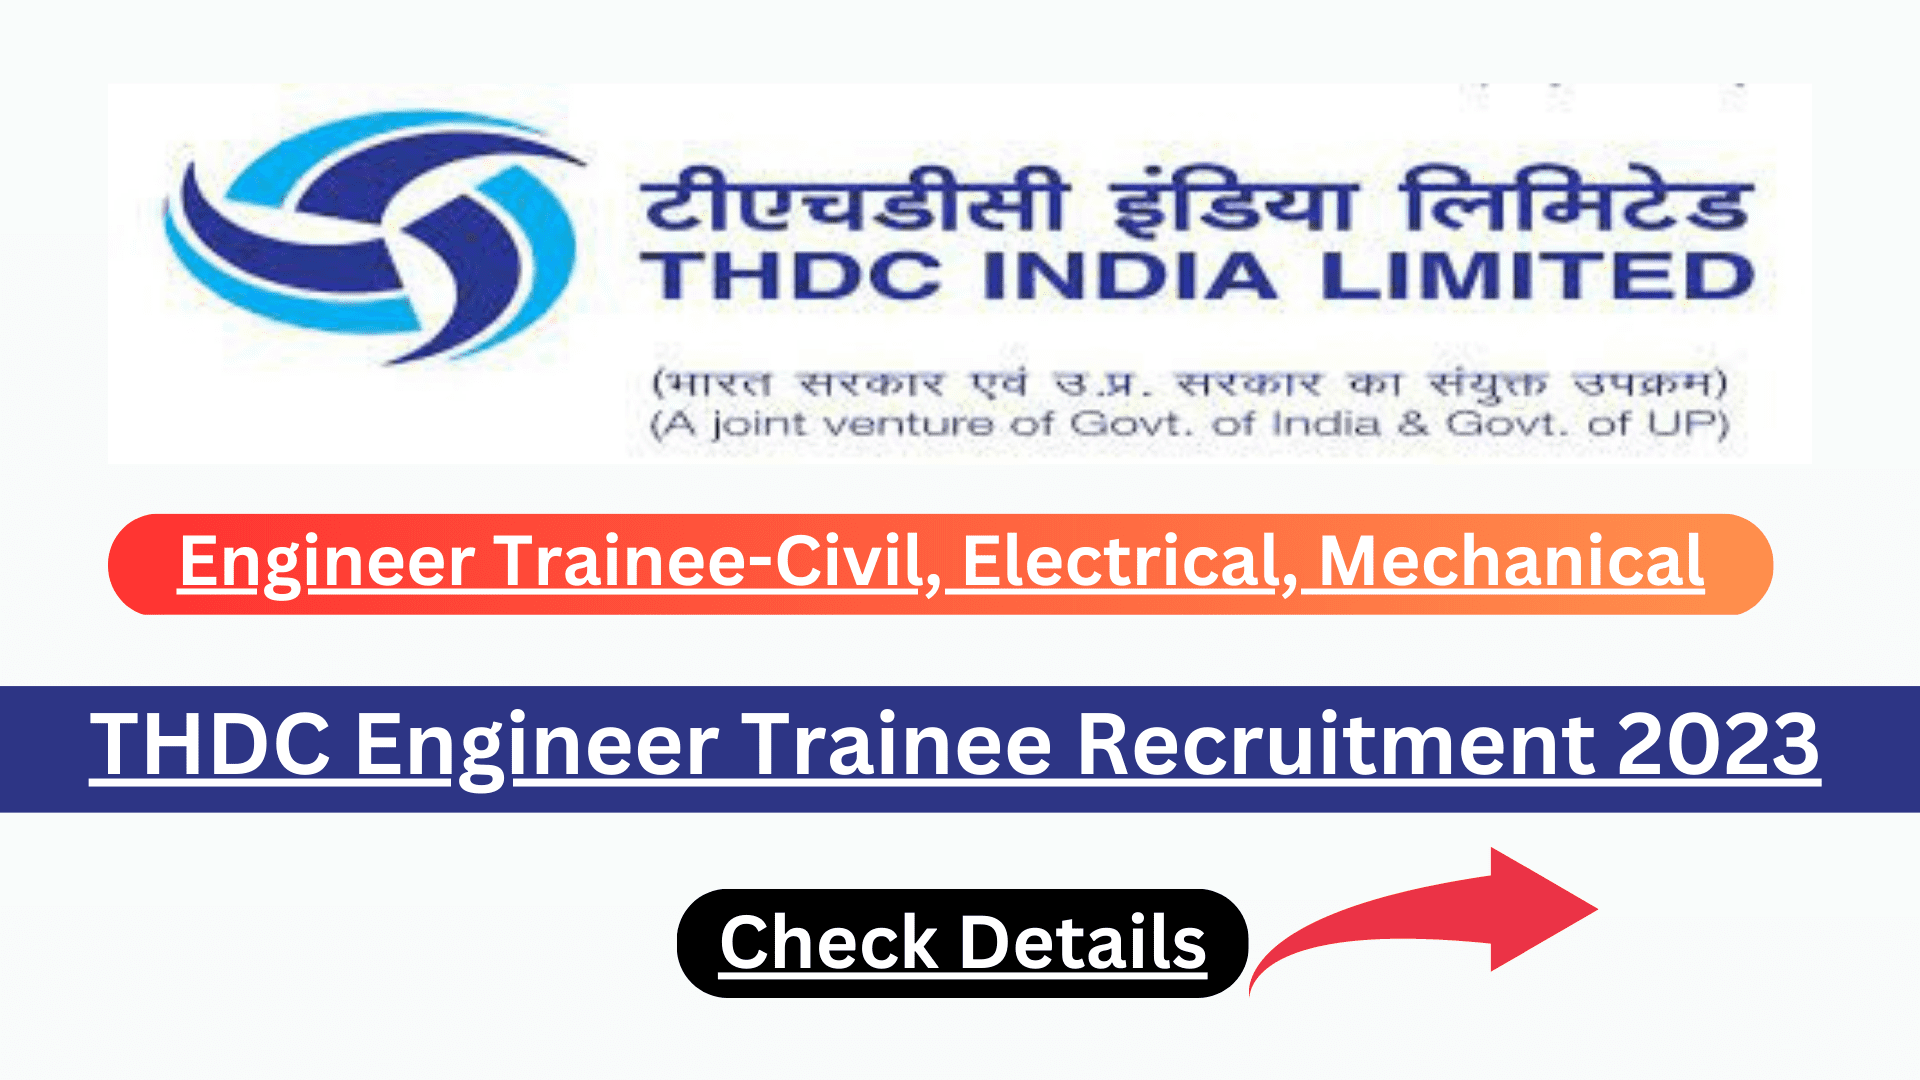 THDC India Limited Recruitment 2023